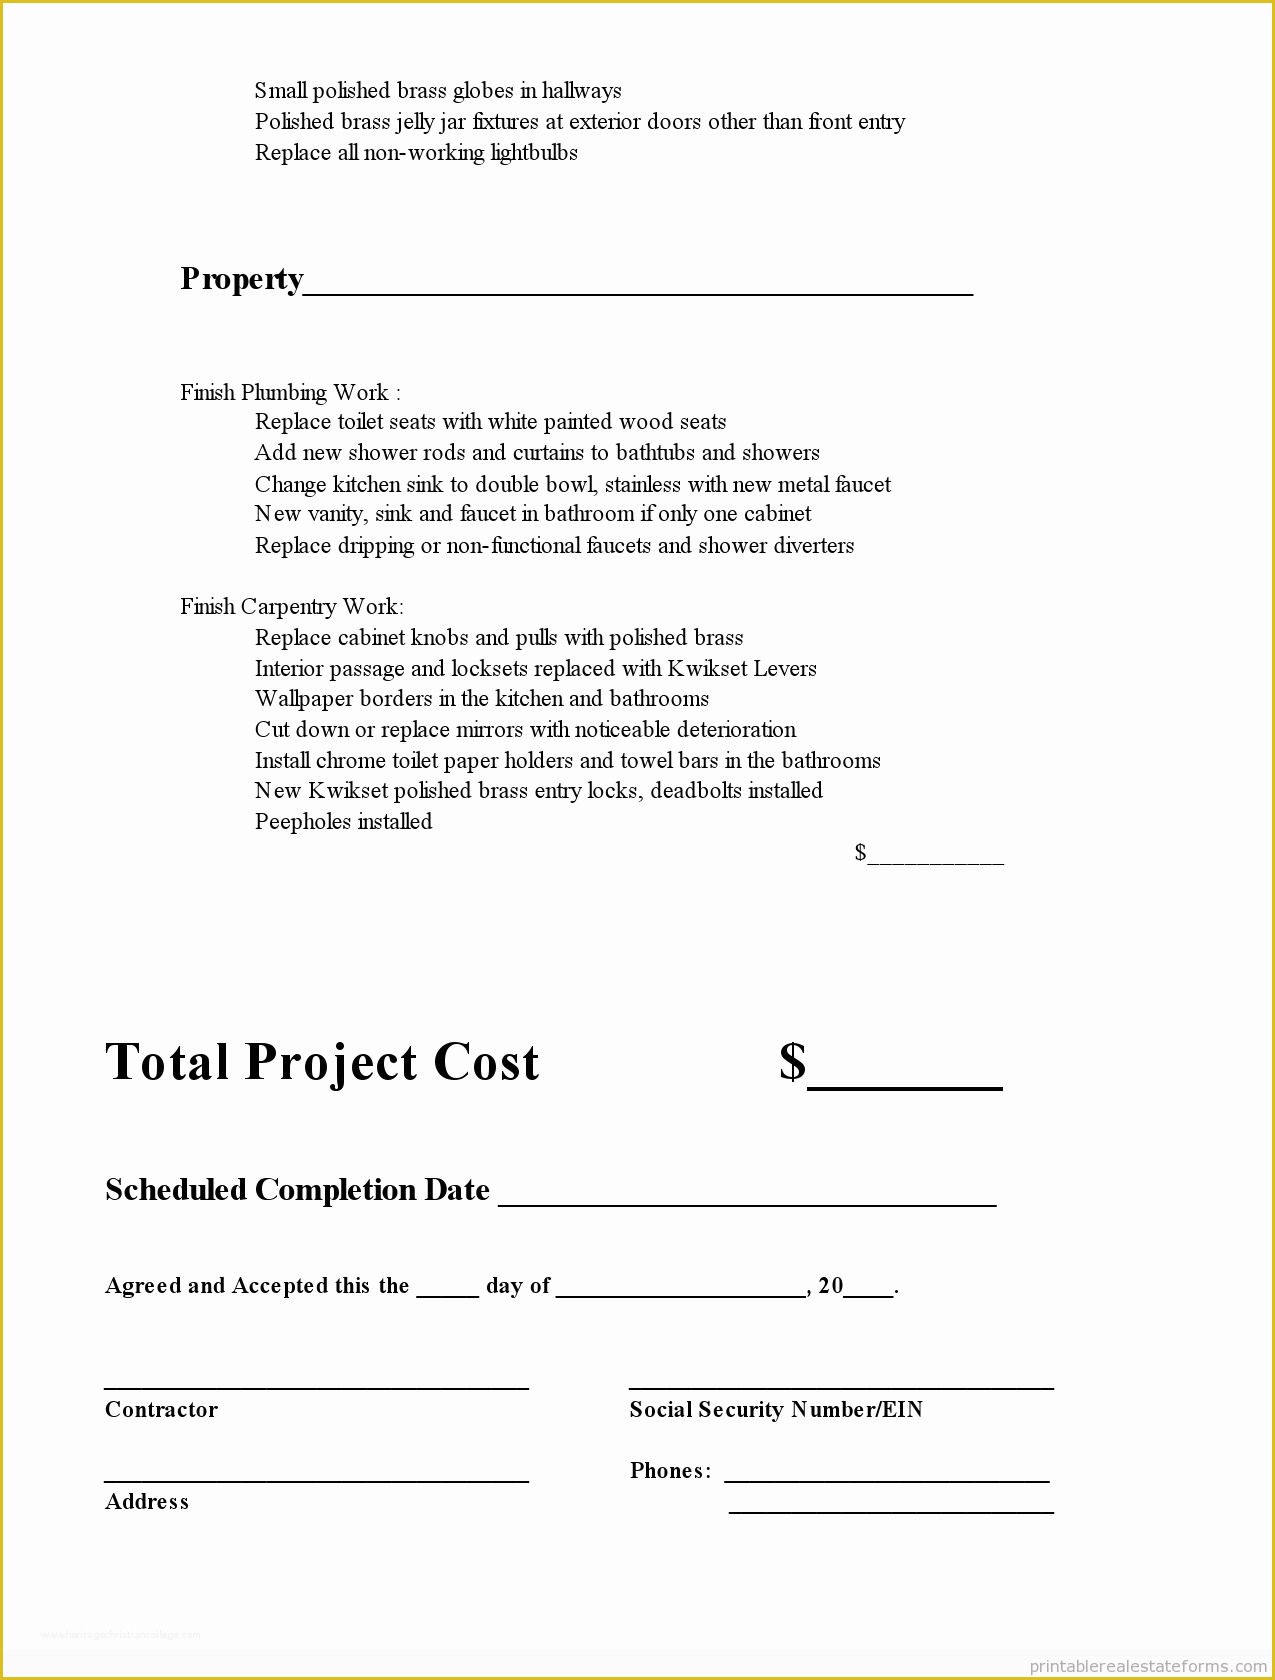 Free Virtual assistant forms and Templates Of Printable Subcontractor Agreement Template 2015